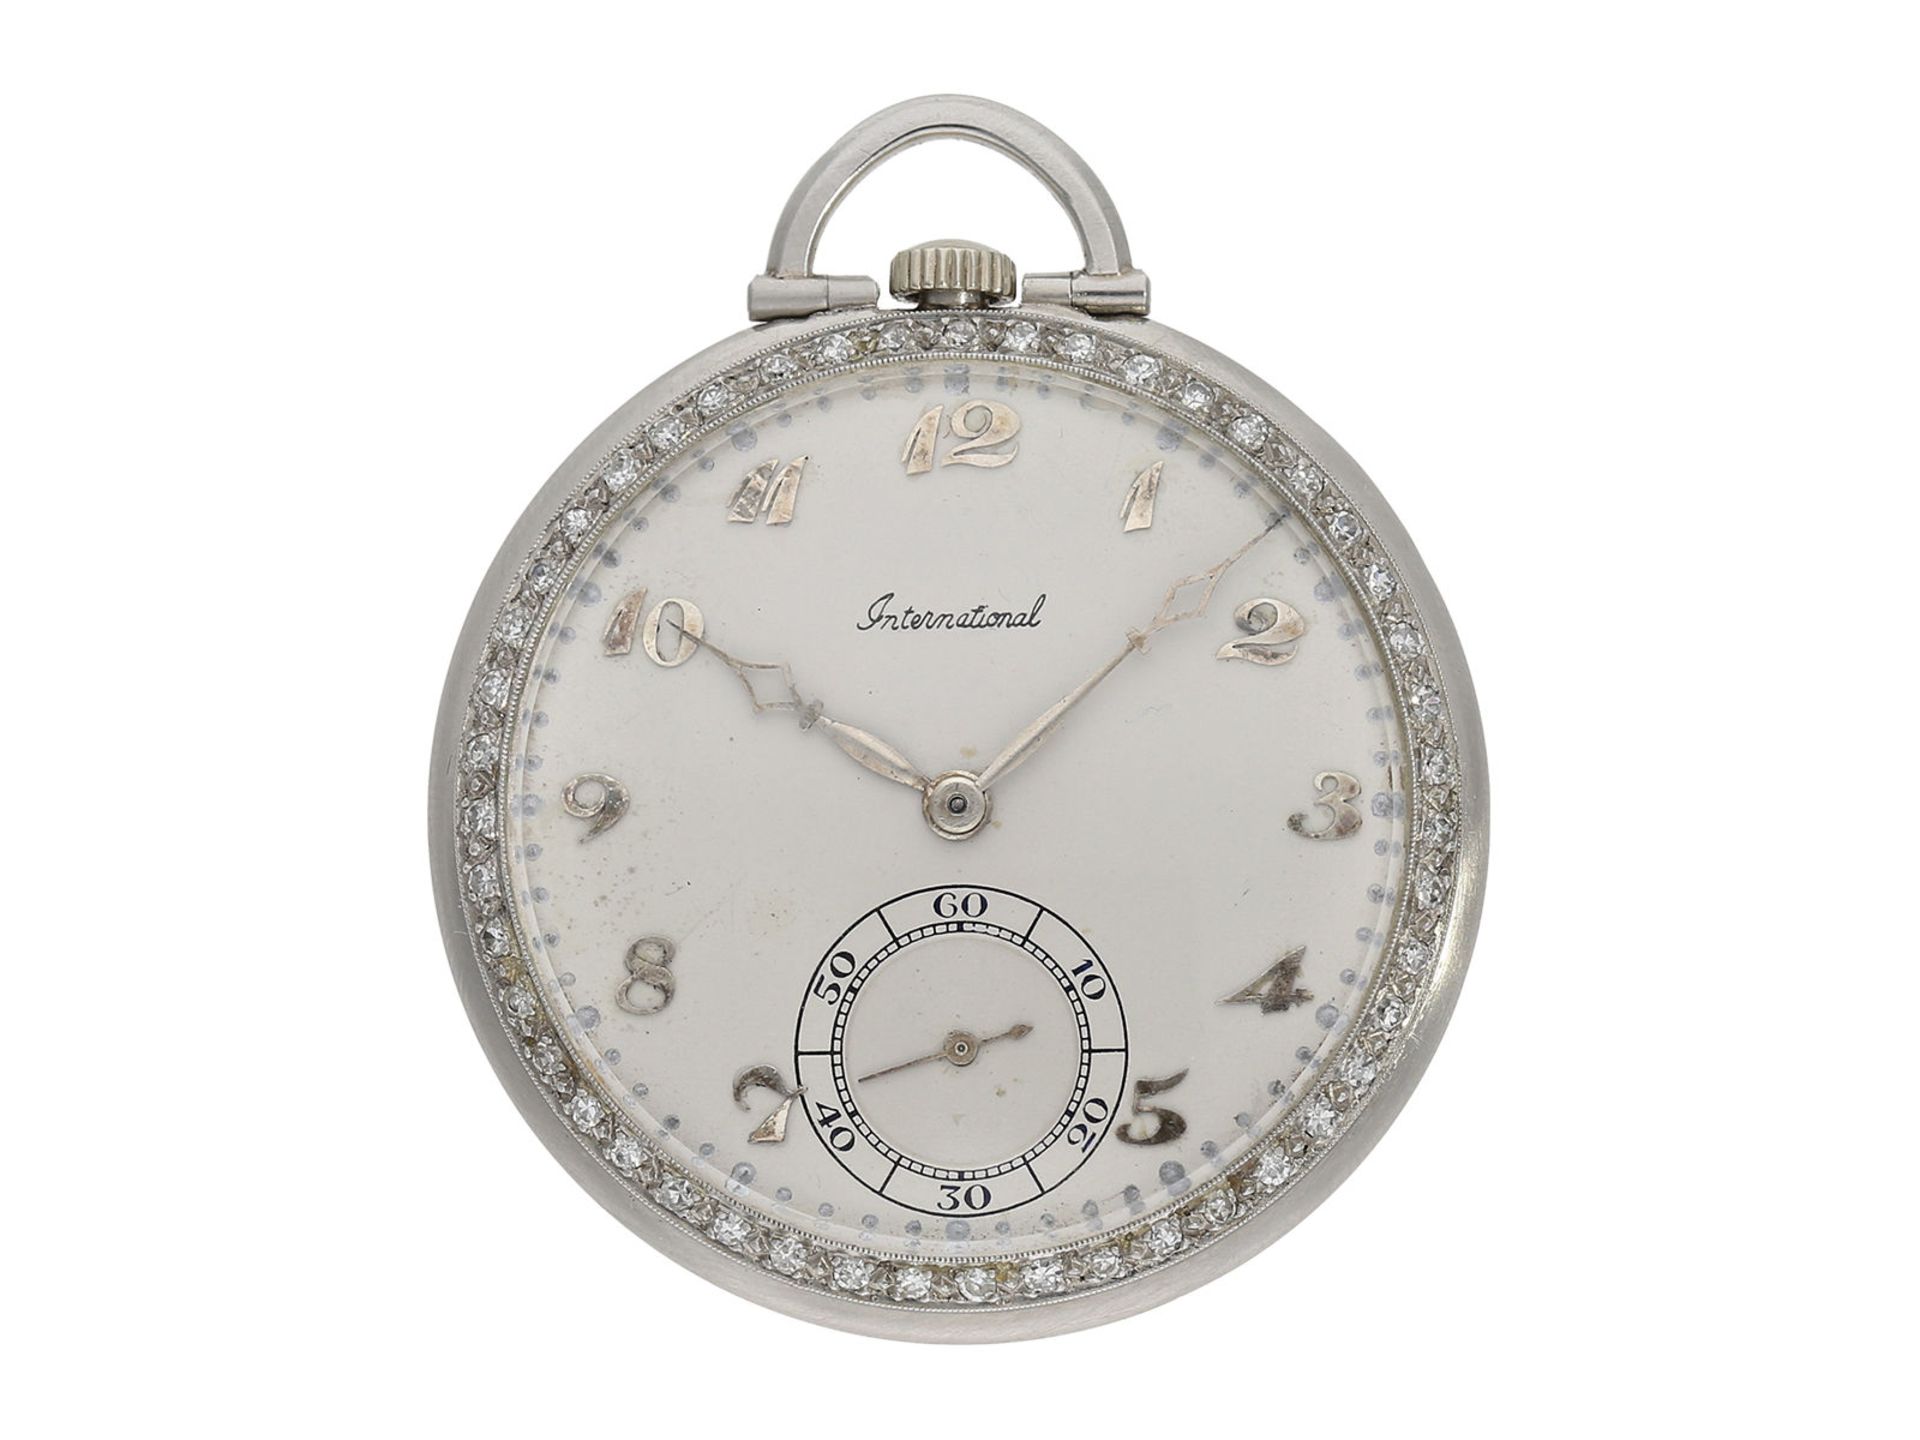 Pocket watch: extremely rare Art Deco dress watch with platinum case and diamond setting, IWC